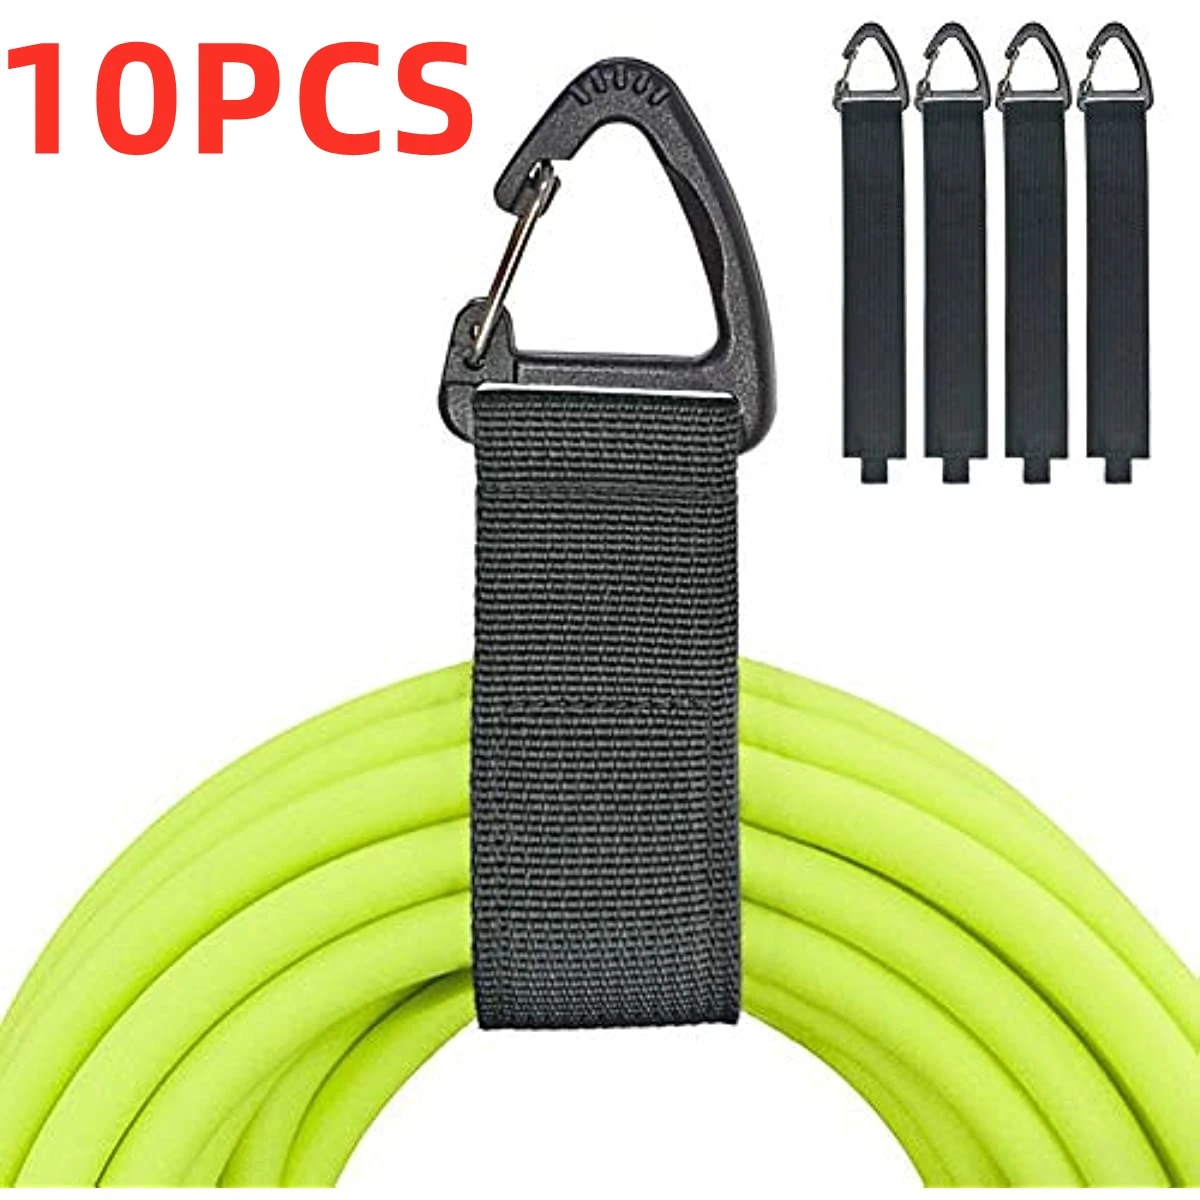 

10PCS Cord Organizer Holder with Triangle Buckle Wire Manager Power Cord Management Nylon Heavy Cord Storage Straps for Cables